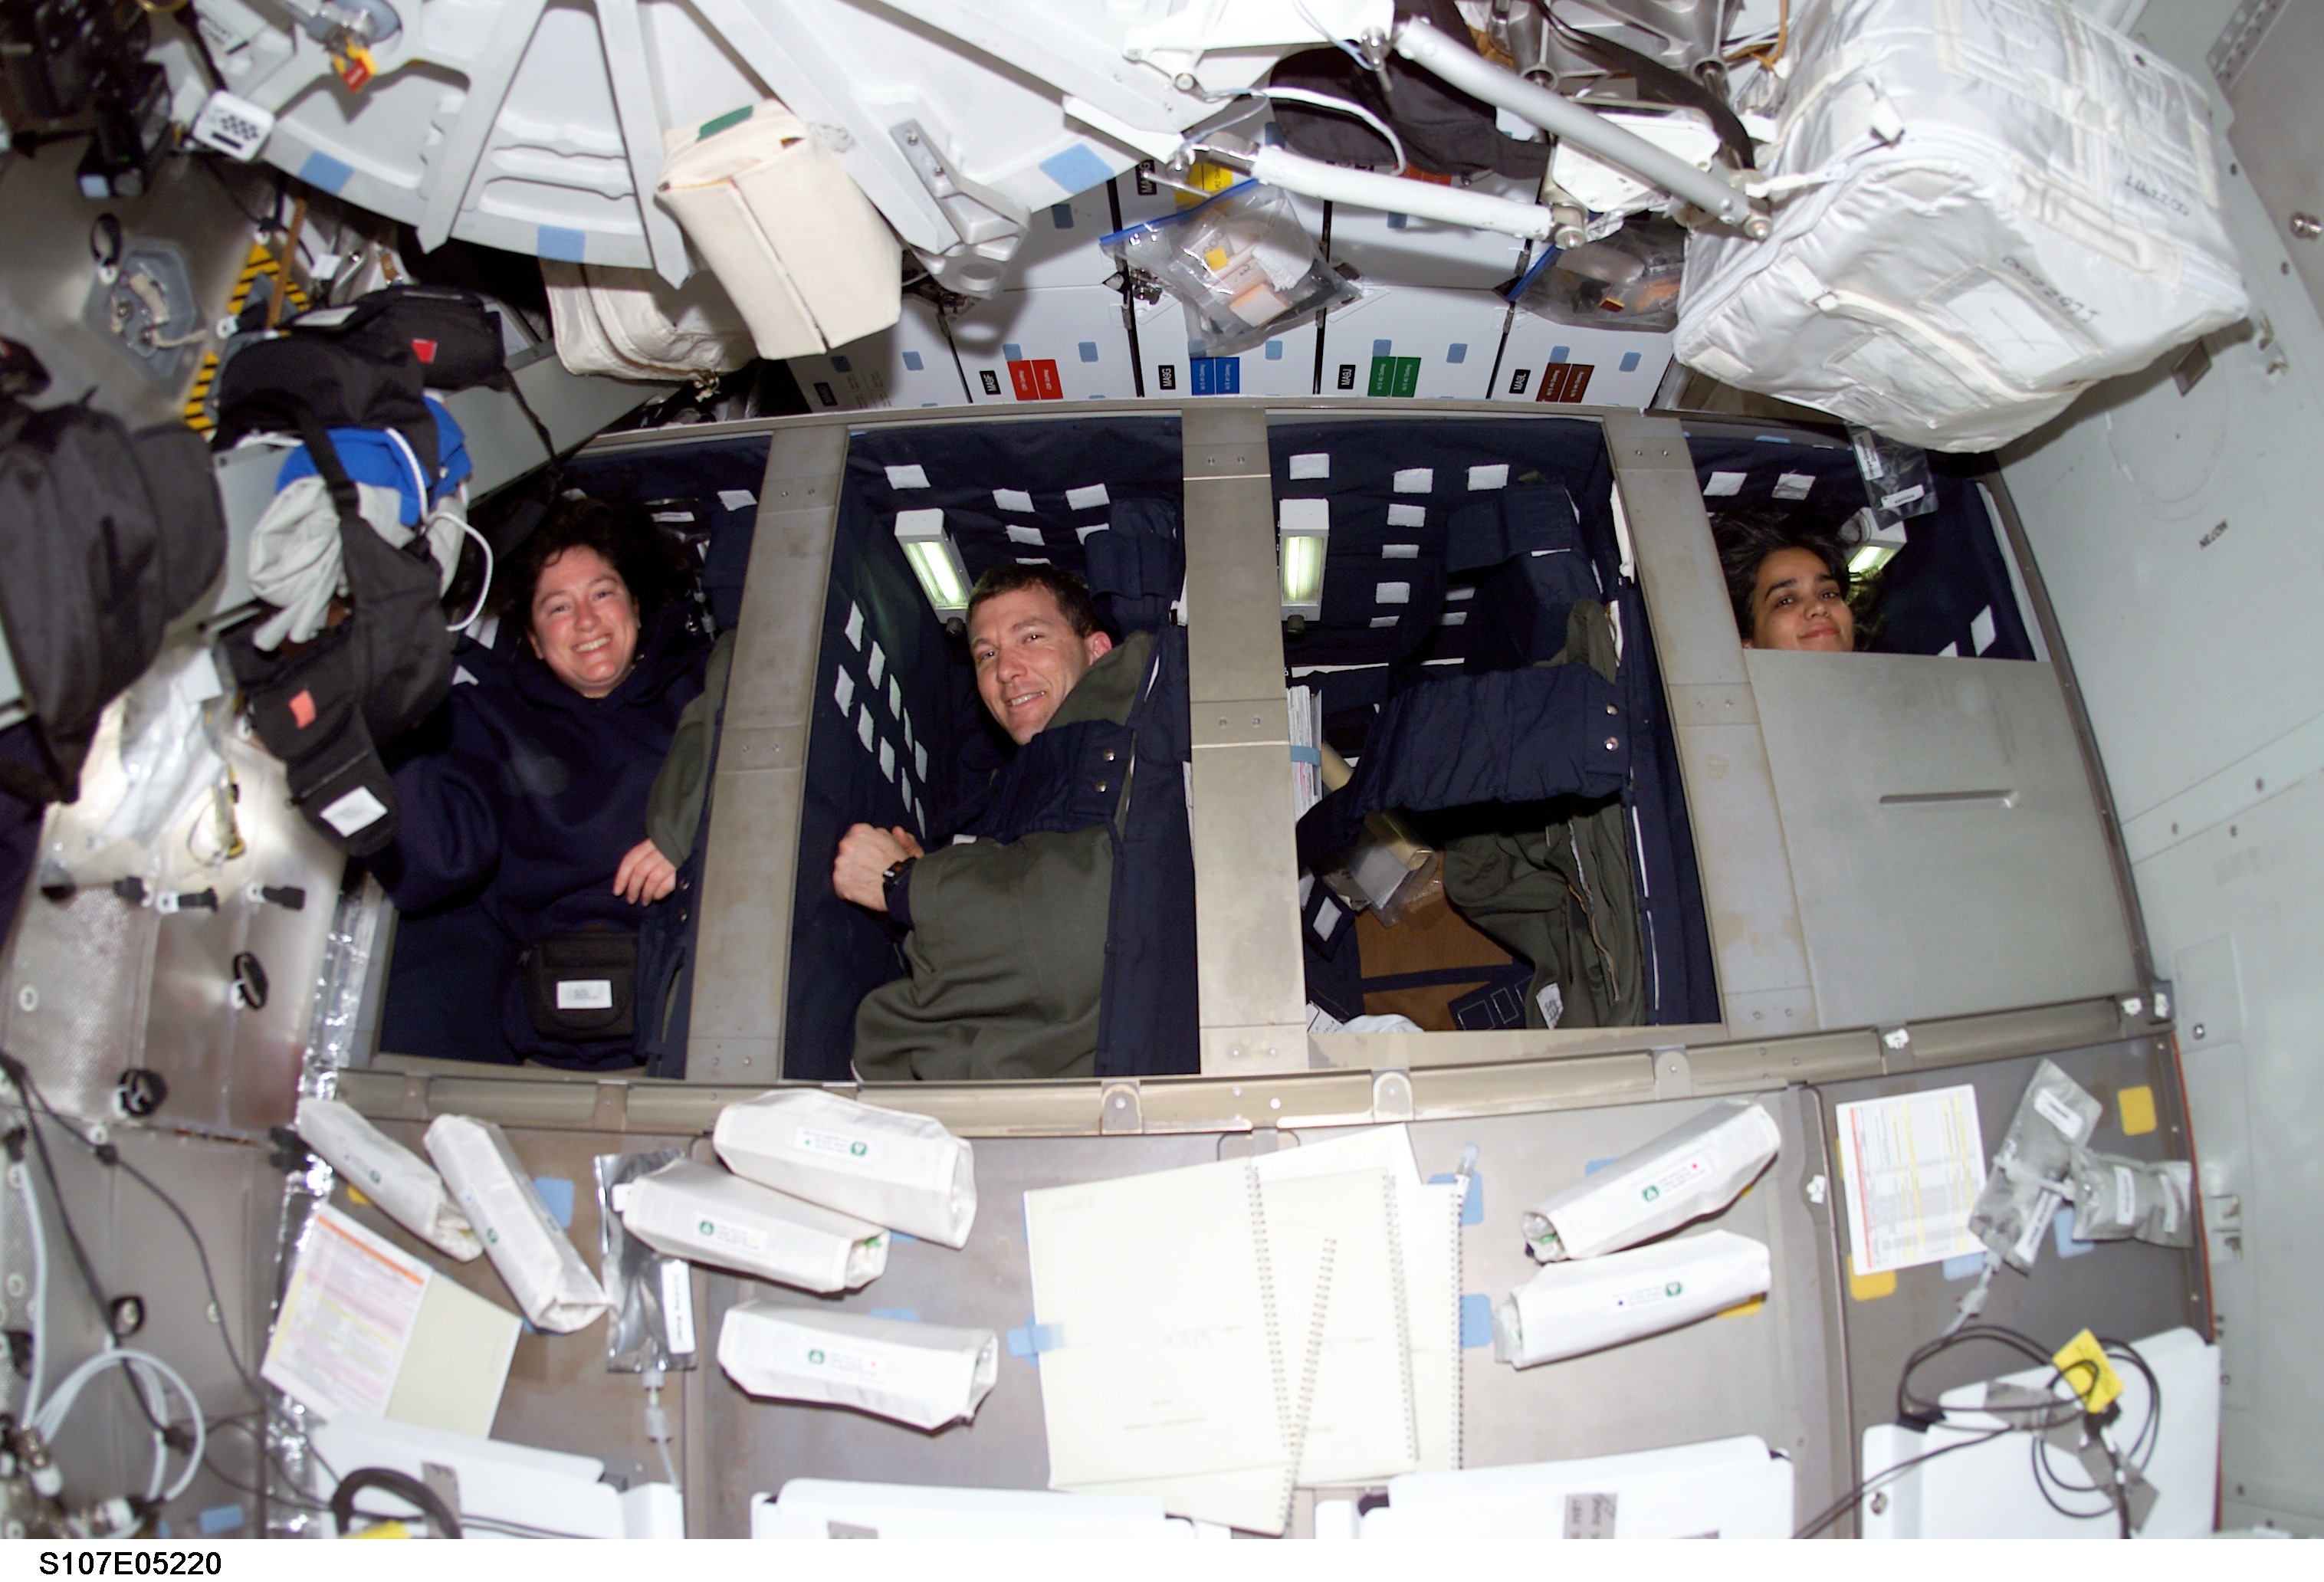 The dual-shift nature of STS-107 required the inclusion of sleep stations in Columbia's middeck. In this image, Red Team members Laurel Clark, Rick Husband and Kalpana Chawla peek out of their bunks. Photo Credit: NASA